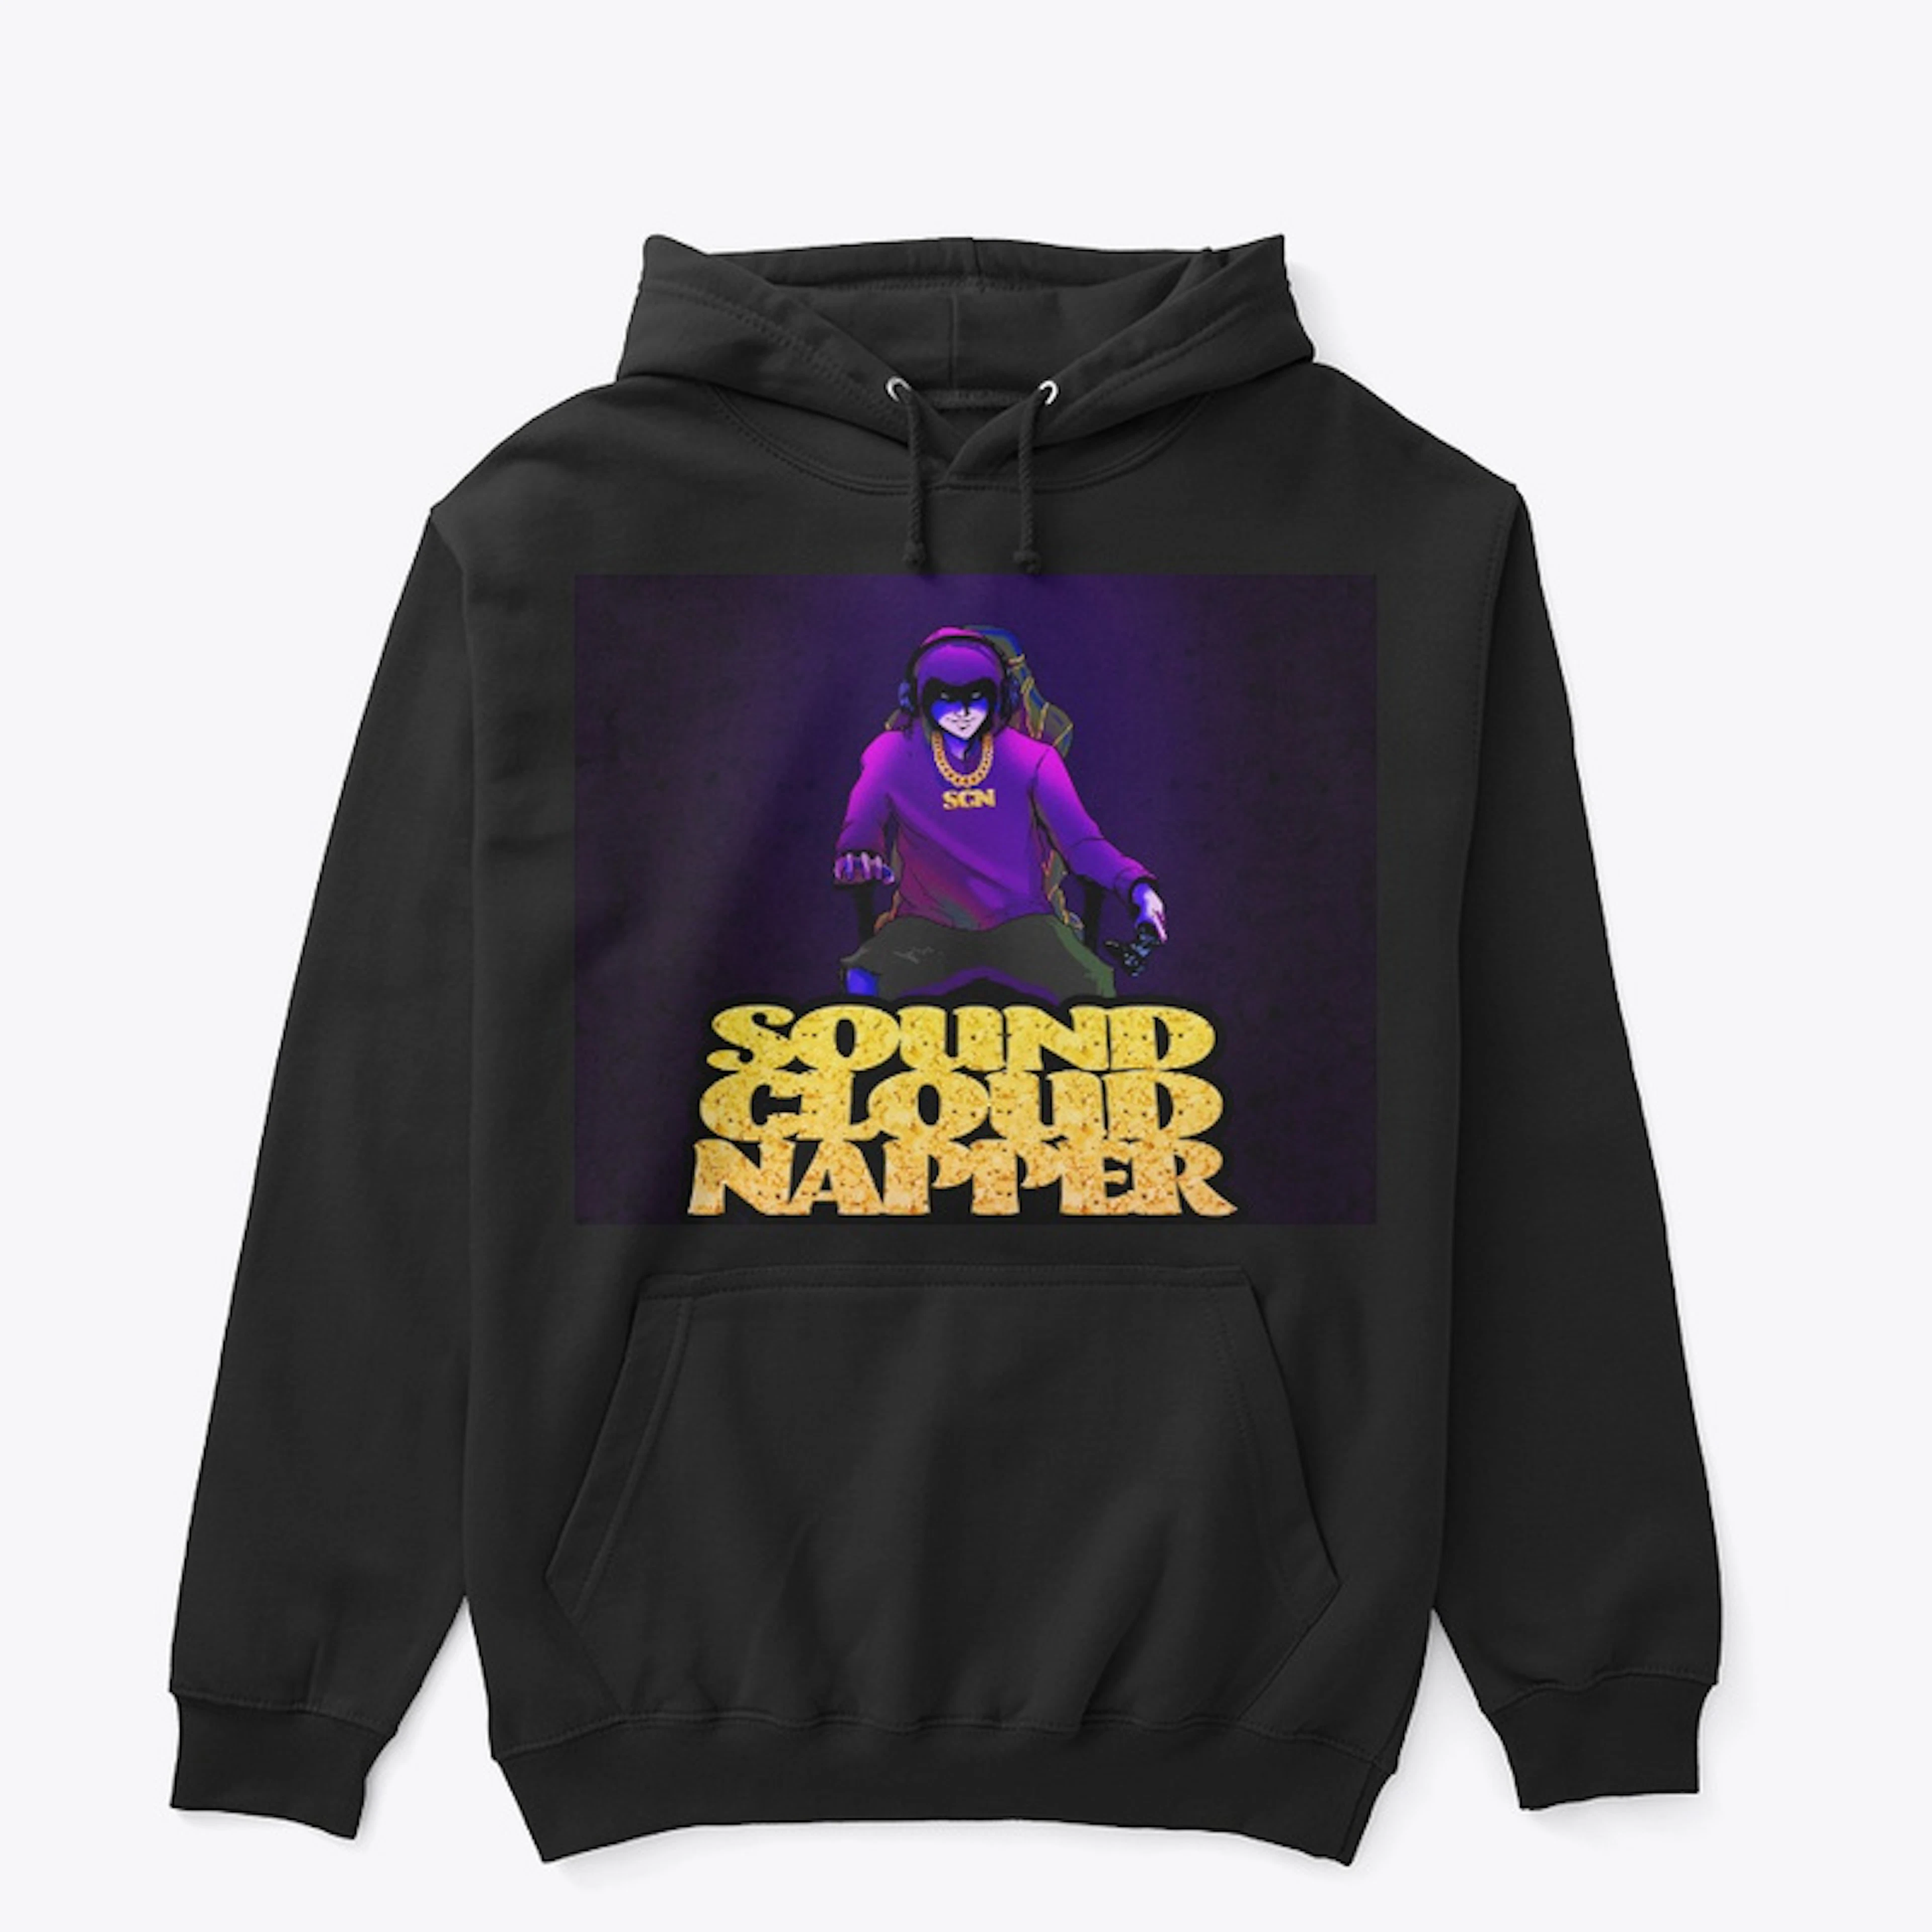 Soundcloudnapper Pullover Hoodie